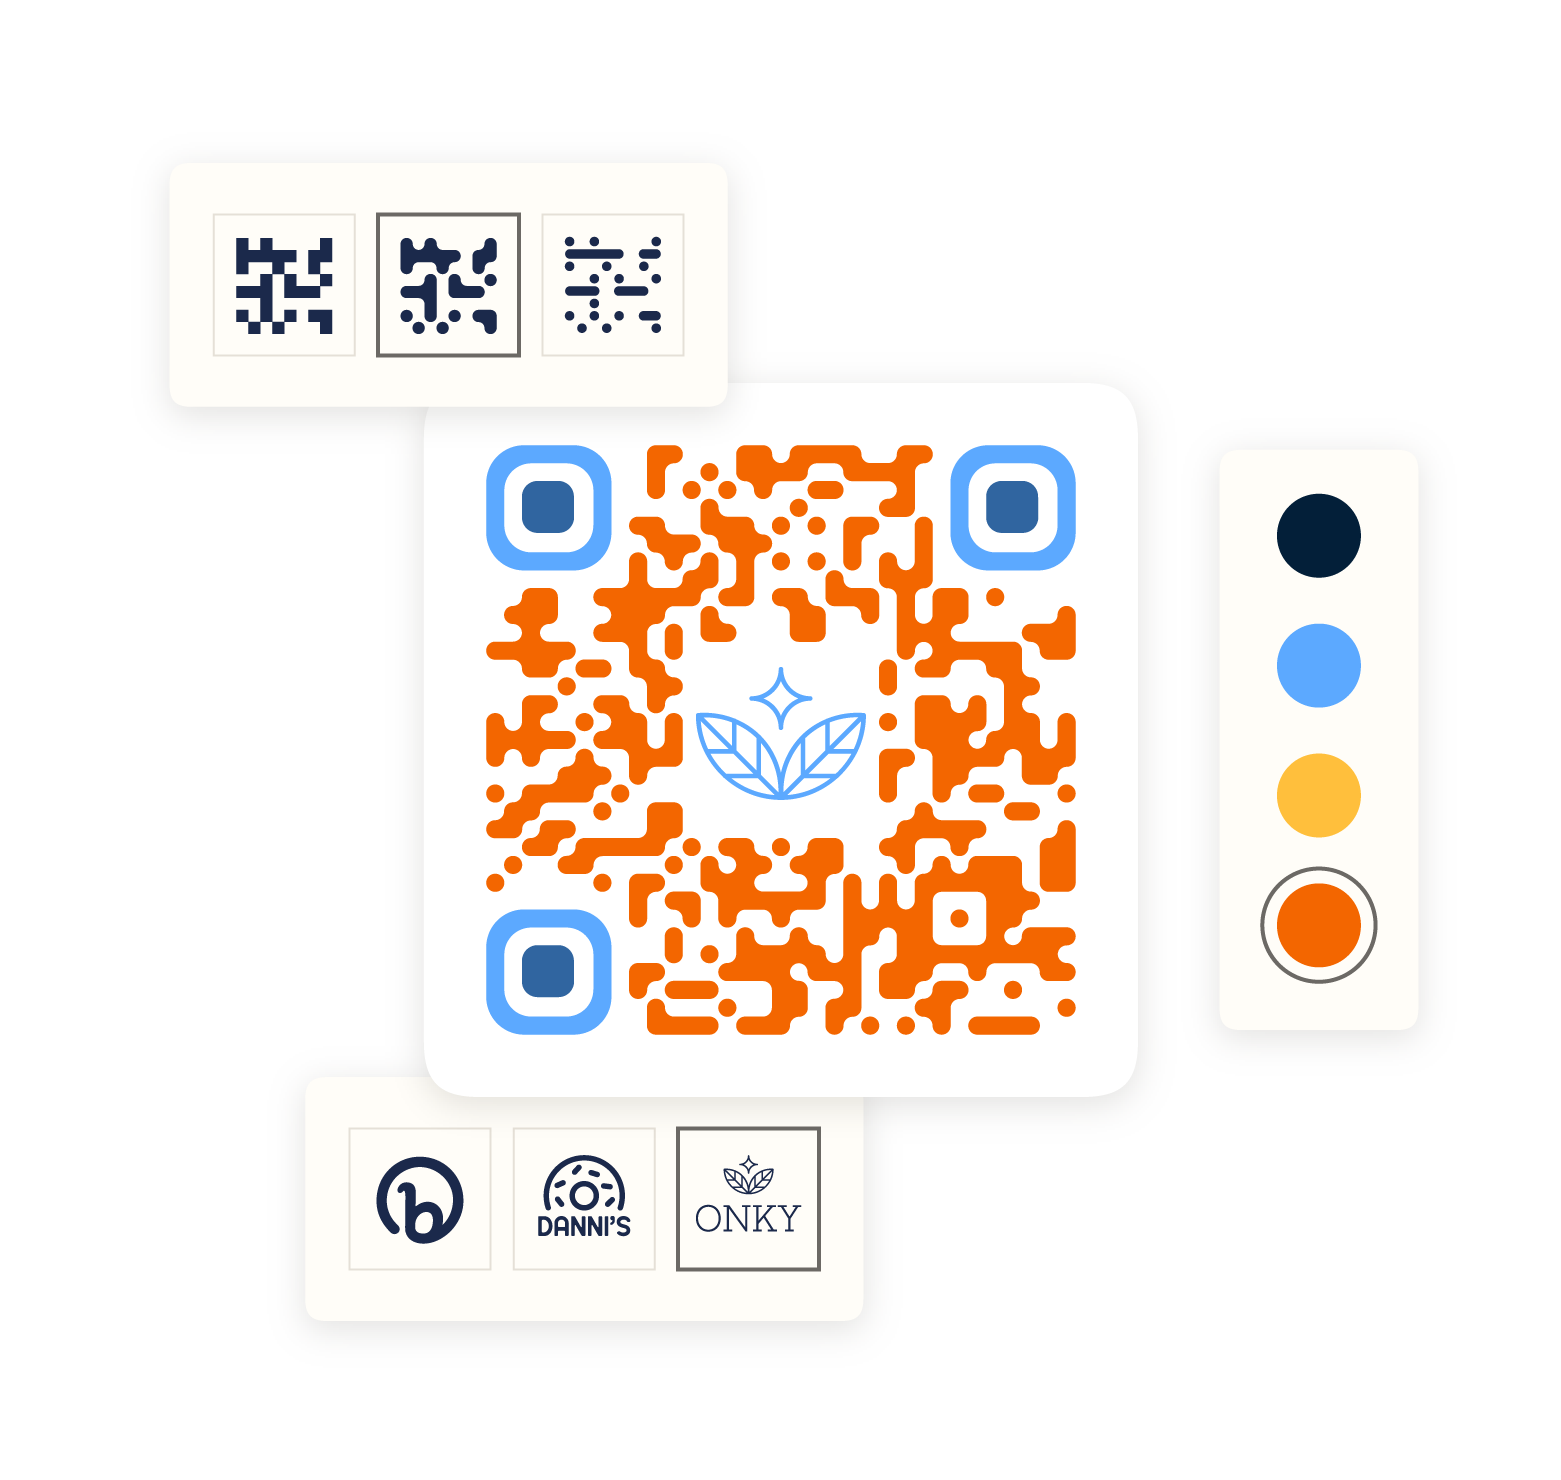 QR code options and sample of colors available